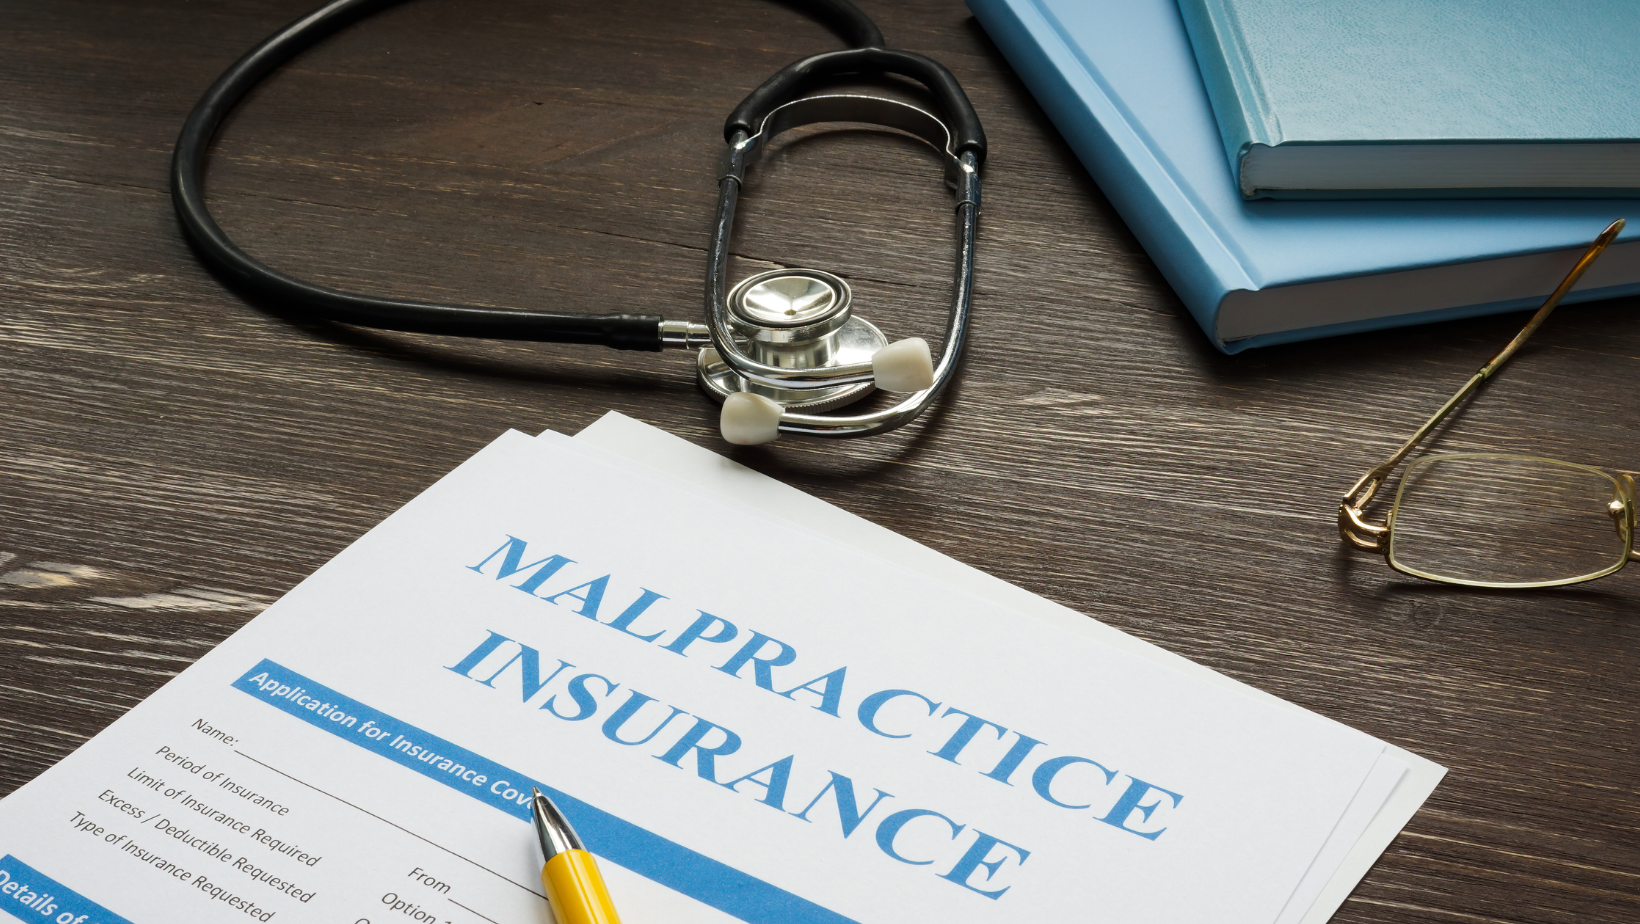 What is typically covered under dental malpractice insurance?